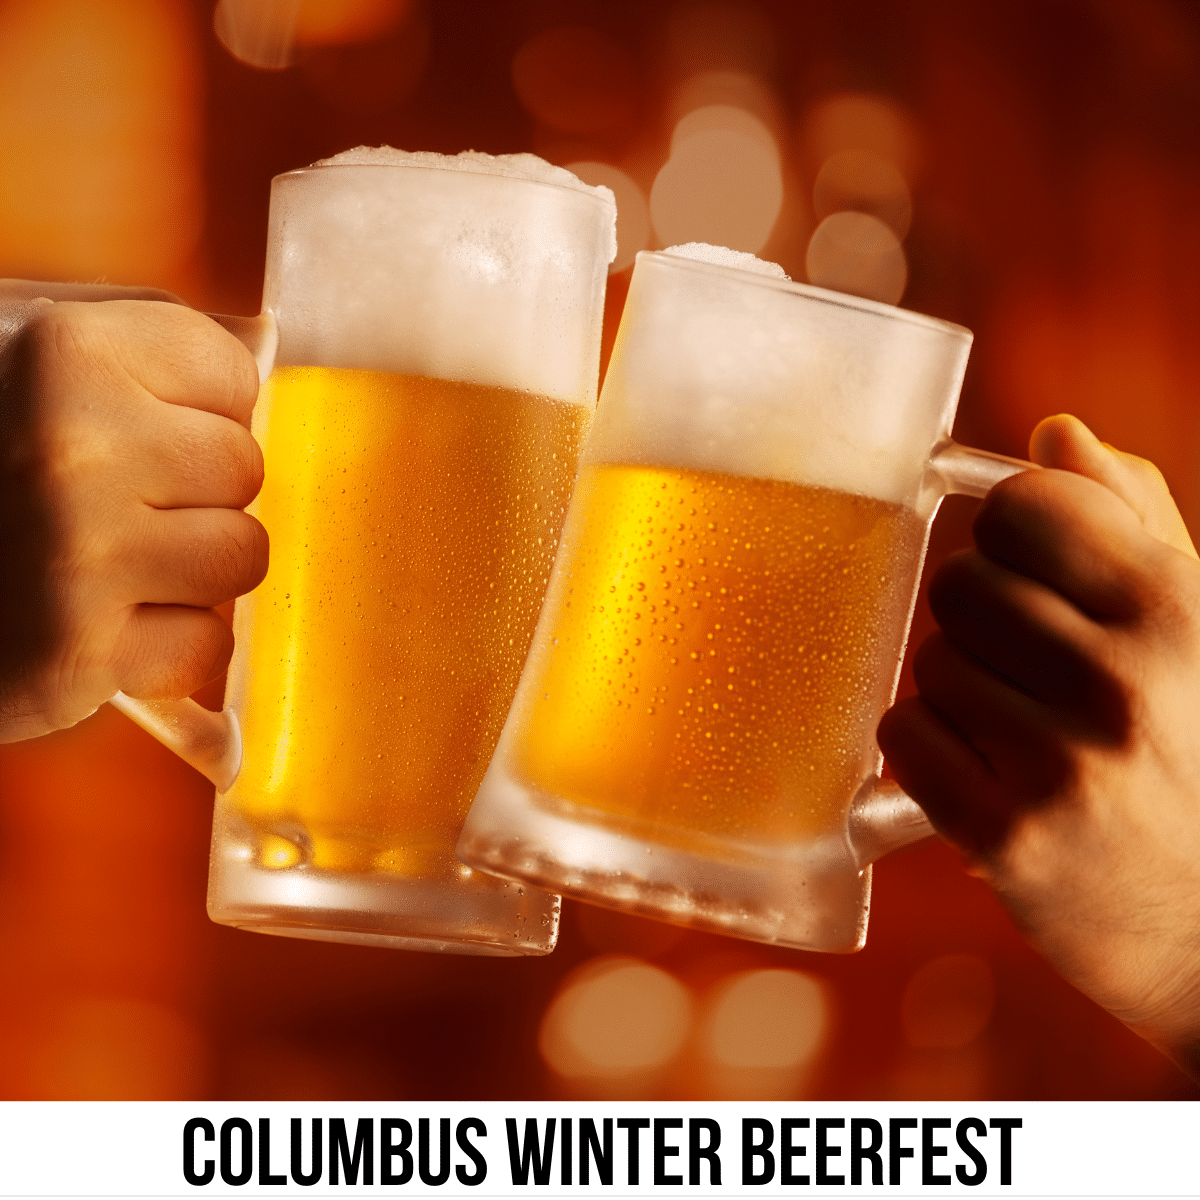 square image with a photo of two beer mugs in a 'cheers' motion. A white strip across the bottom has the text Columbus Winter Beerfest